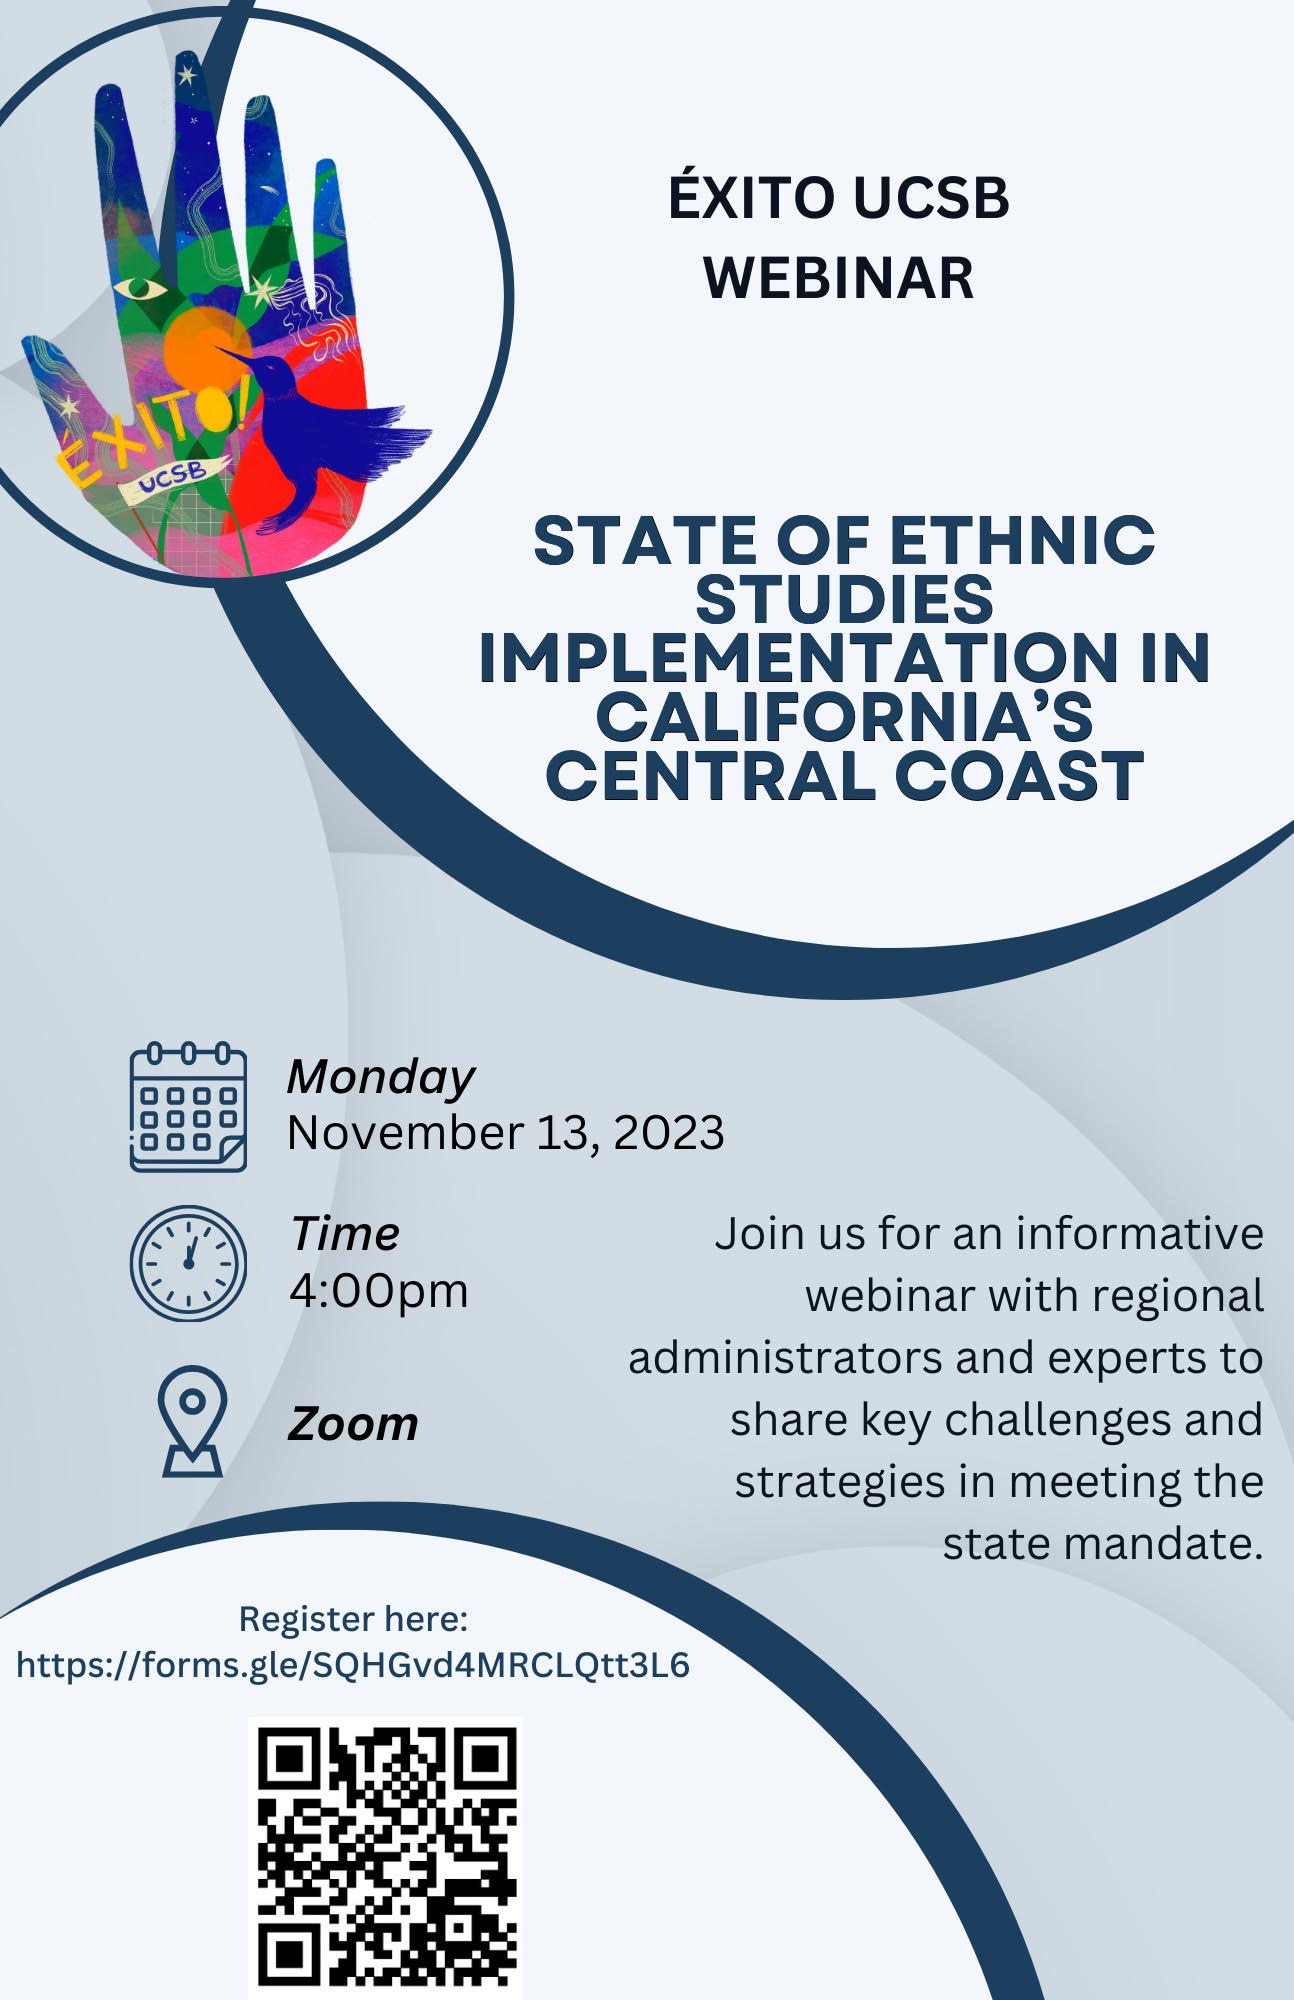 Flyer displaying information for the State of Ethnic Studies Webinar hosted by EXITO